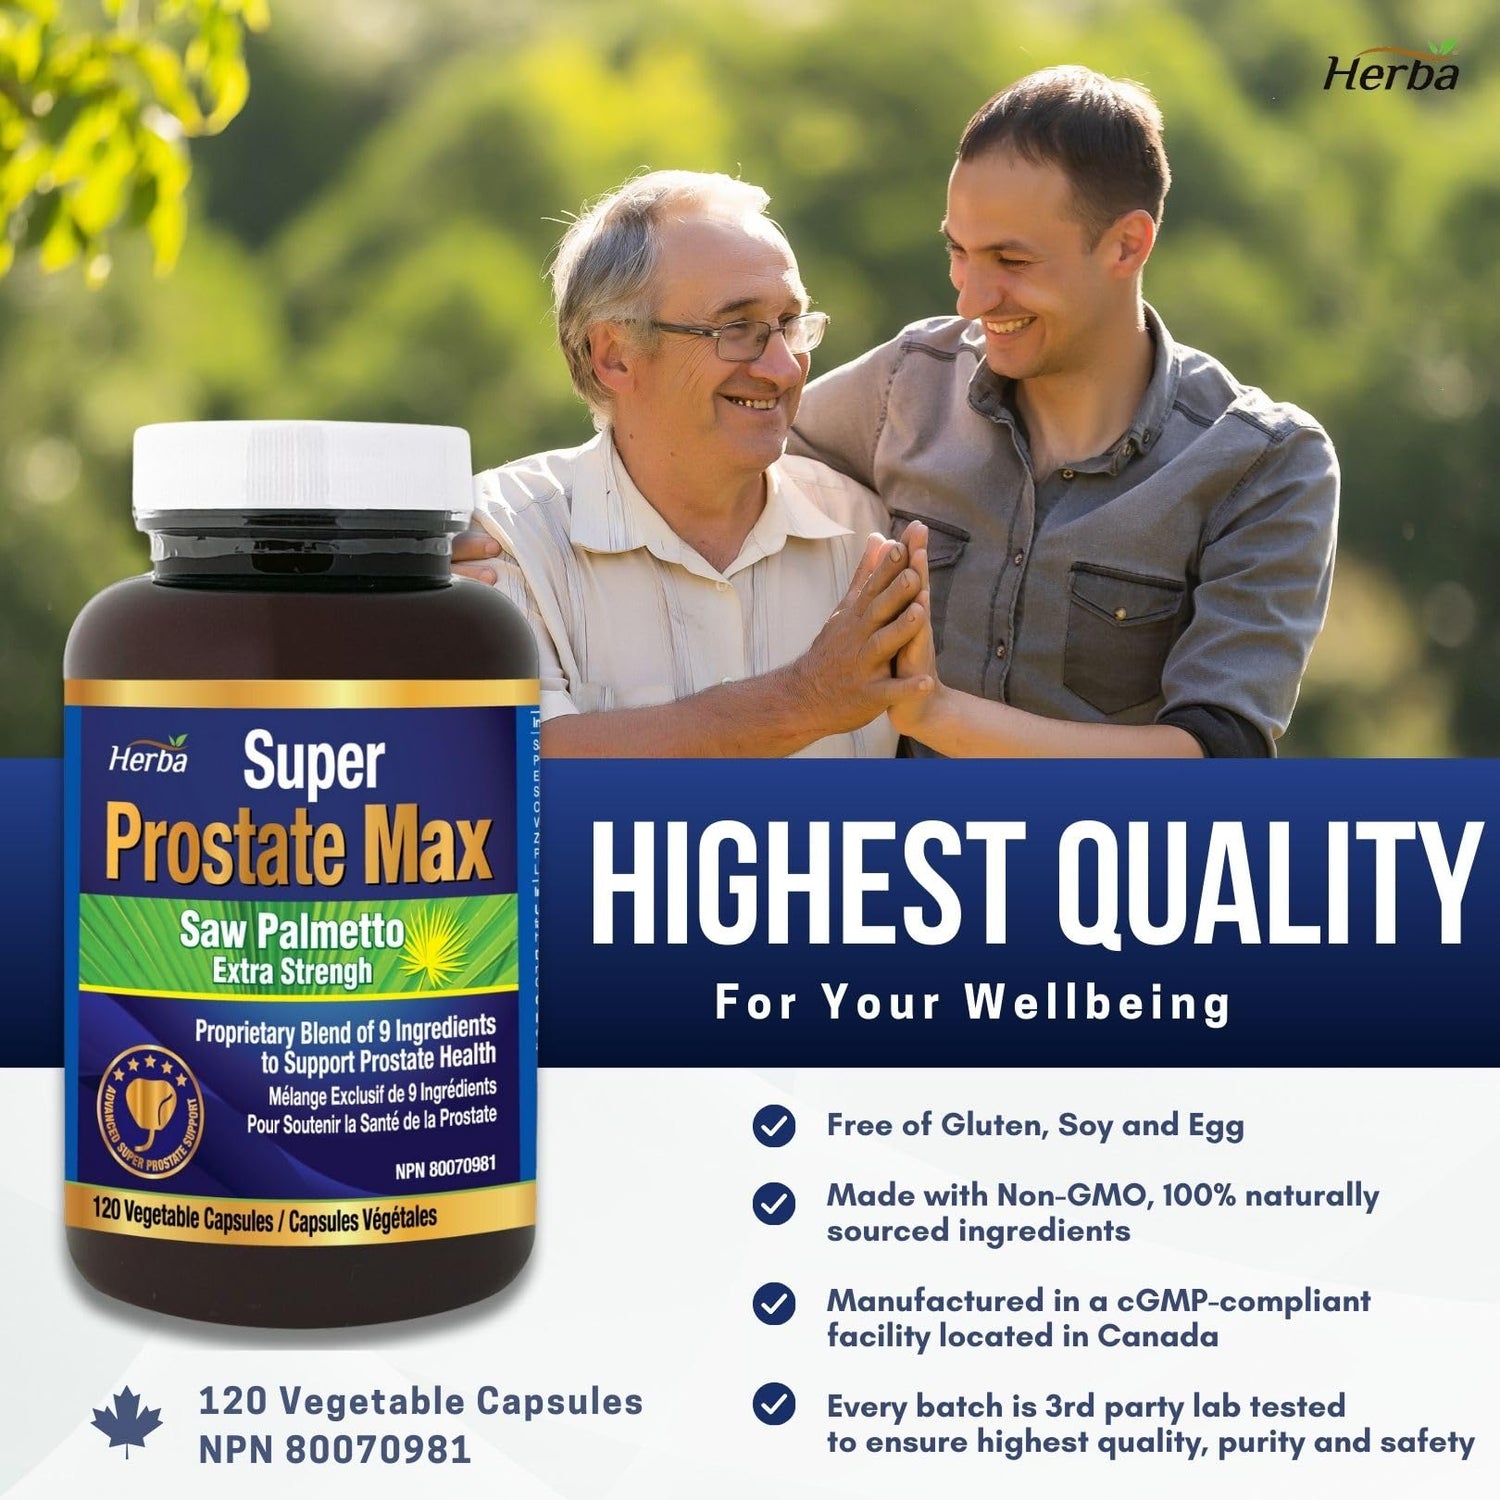 Prostate Max - Prostate Supplement for Men – 120 Capsules | 9 Natural Ingredients